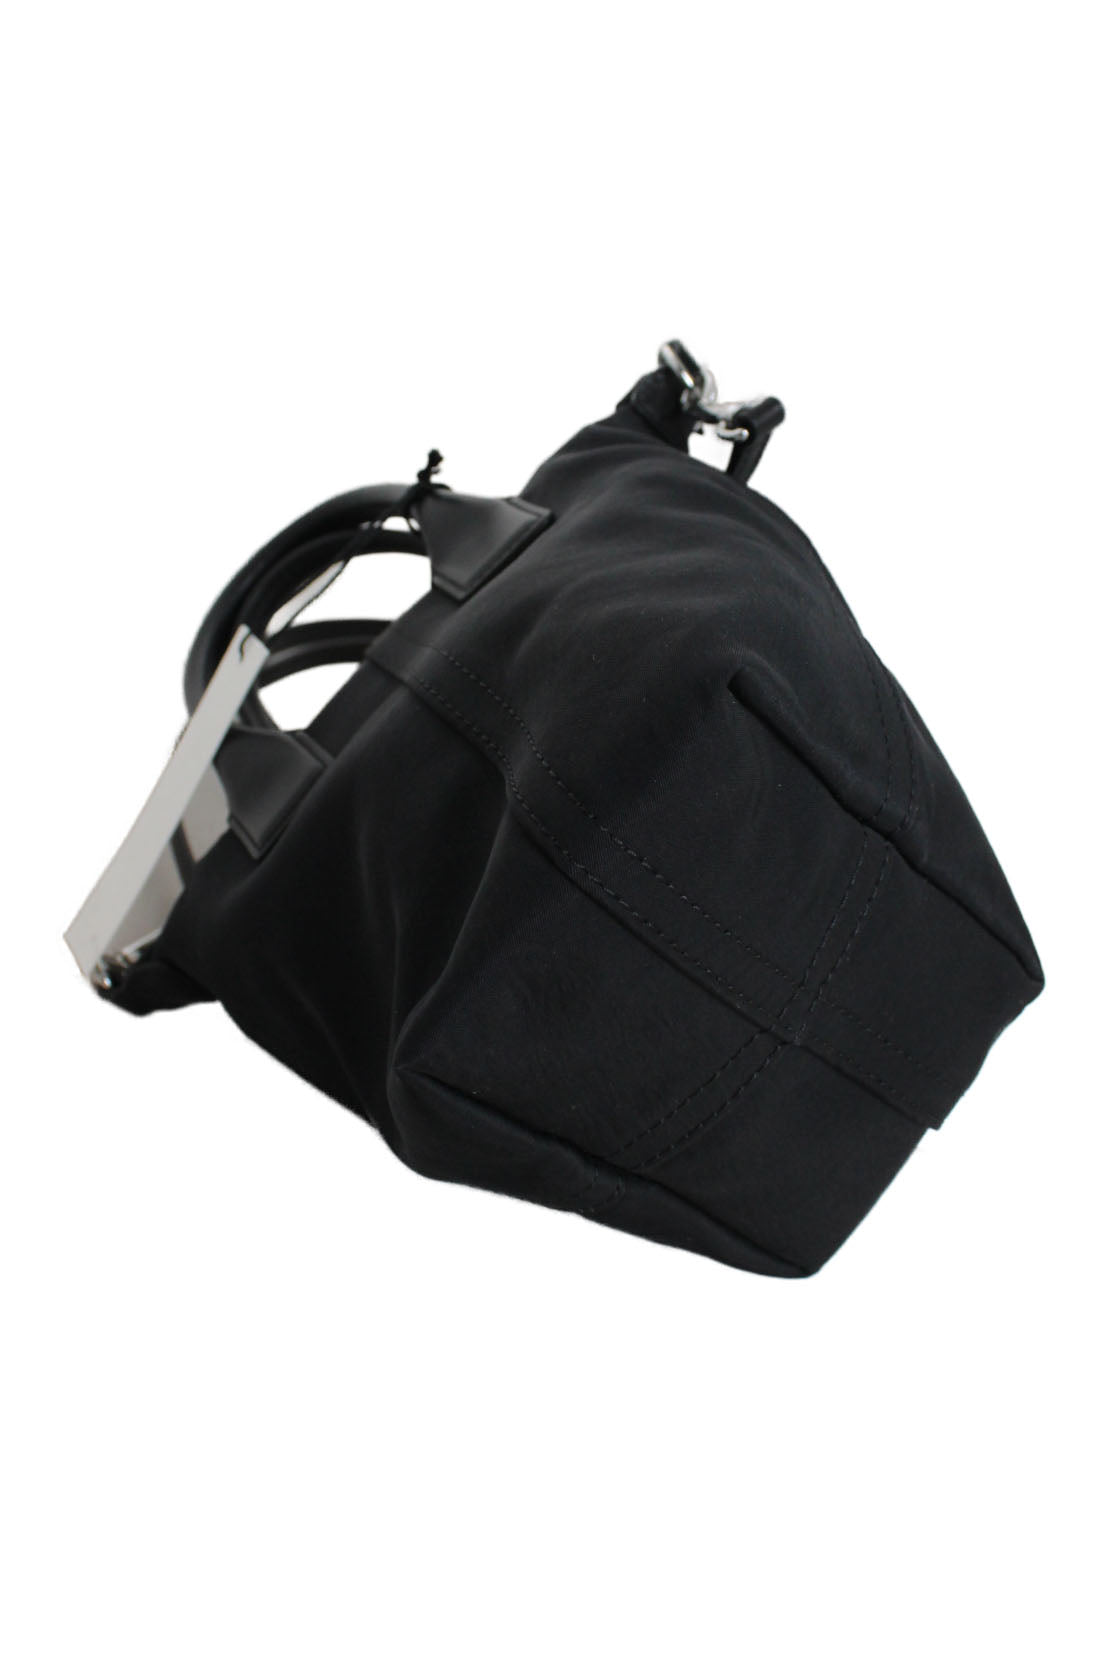 ¾ bottom view of black tote showcasing tapered shape. 